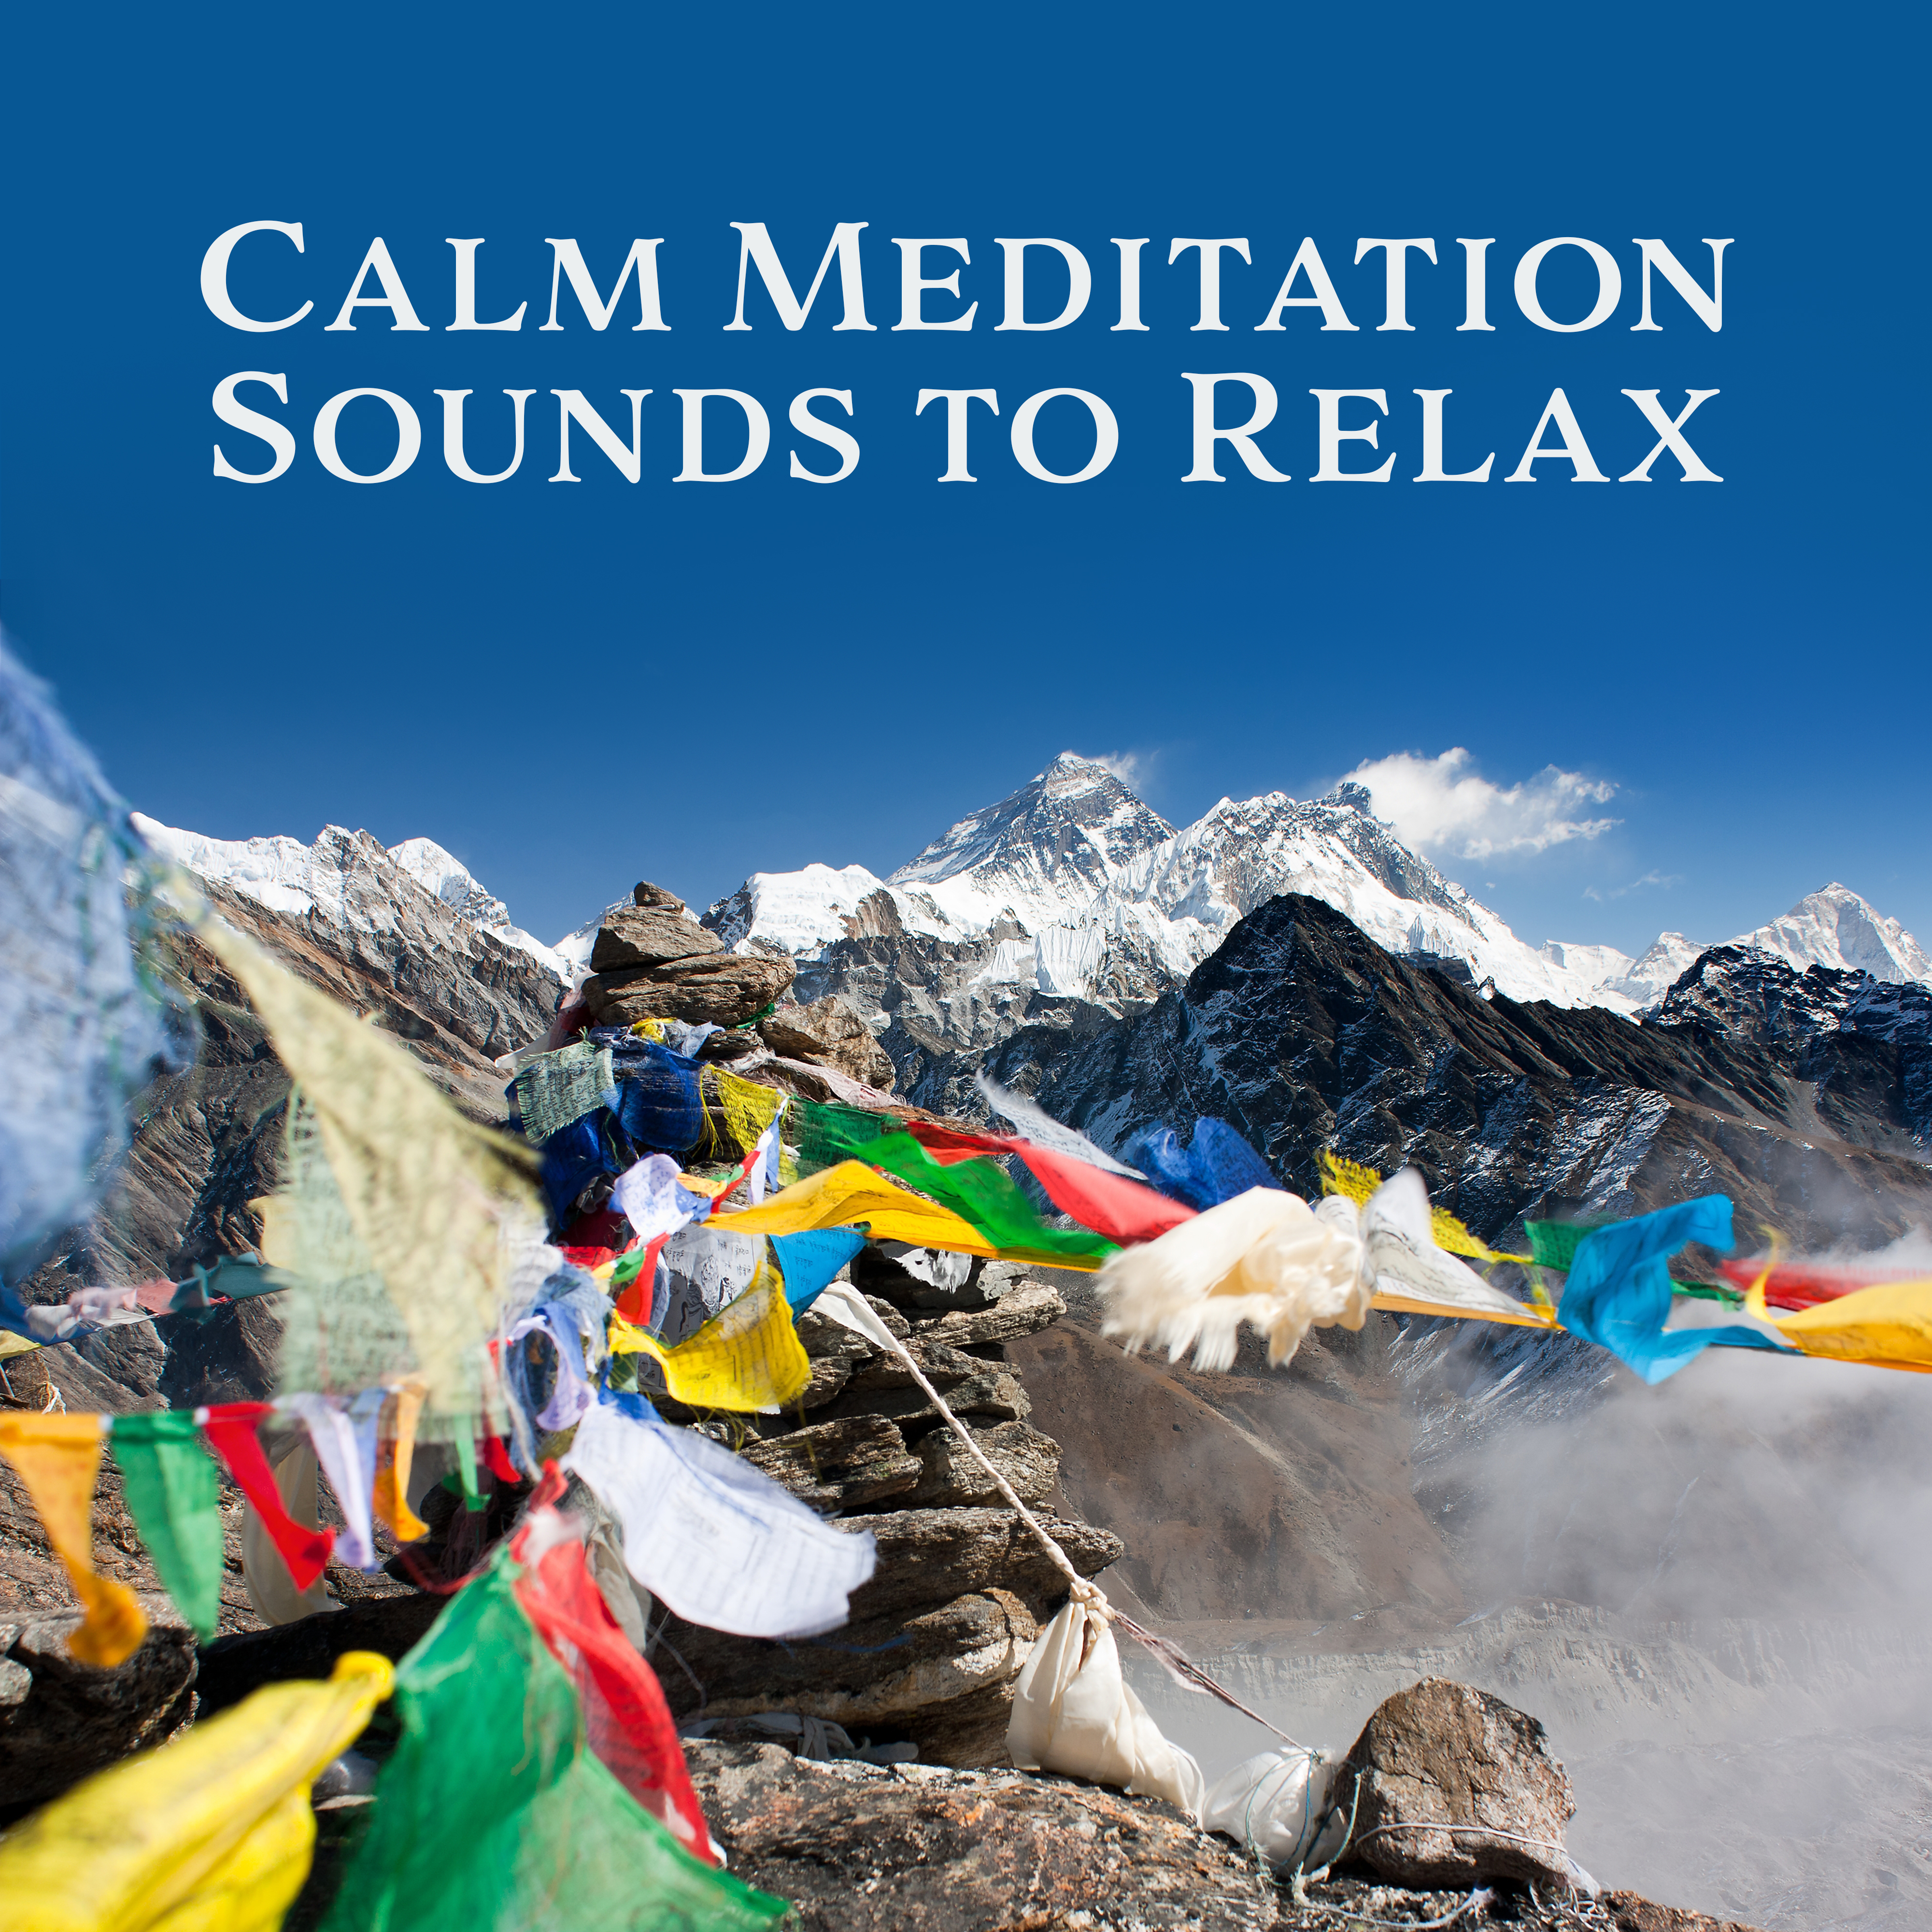 Calm Meditation Sounds to Relax